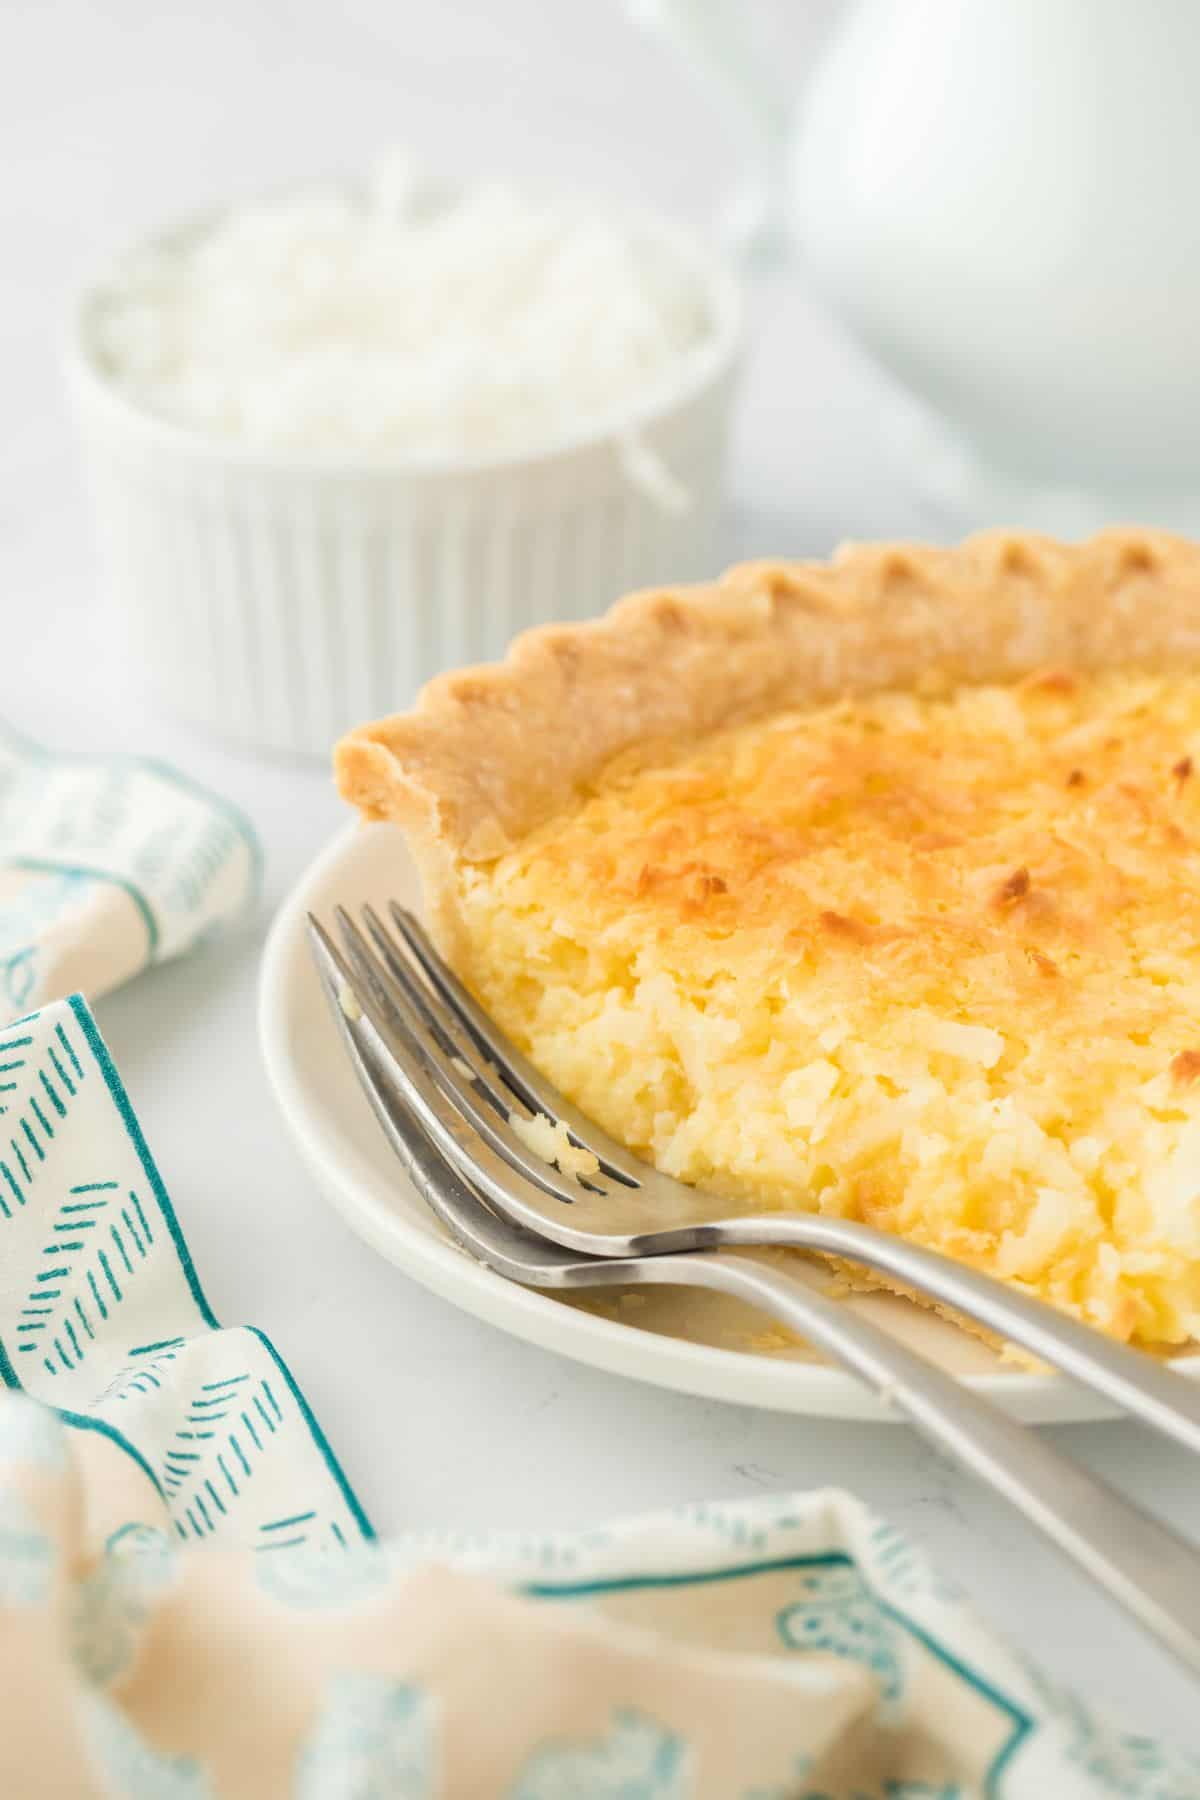 Close up of a slice of coconut custard pie on a plate with a fork. In the background there is a bowl of shredded coconut